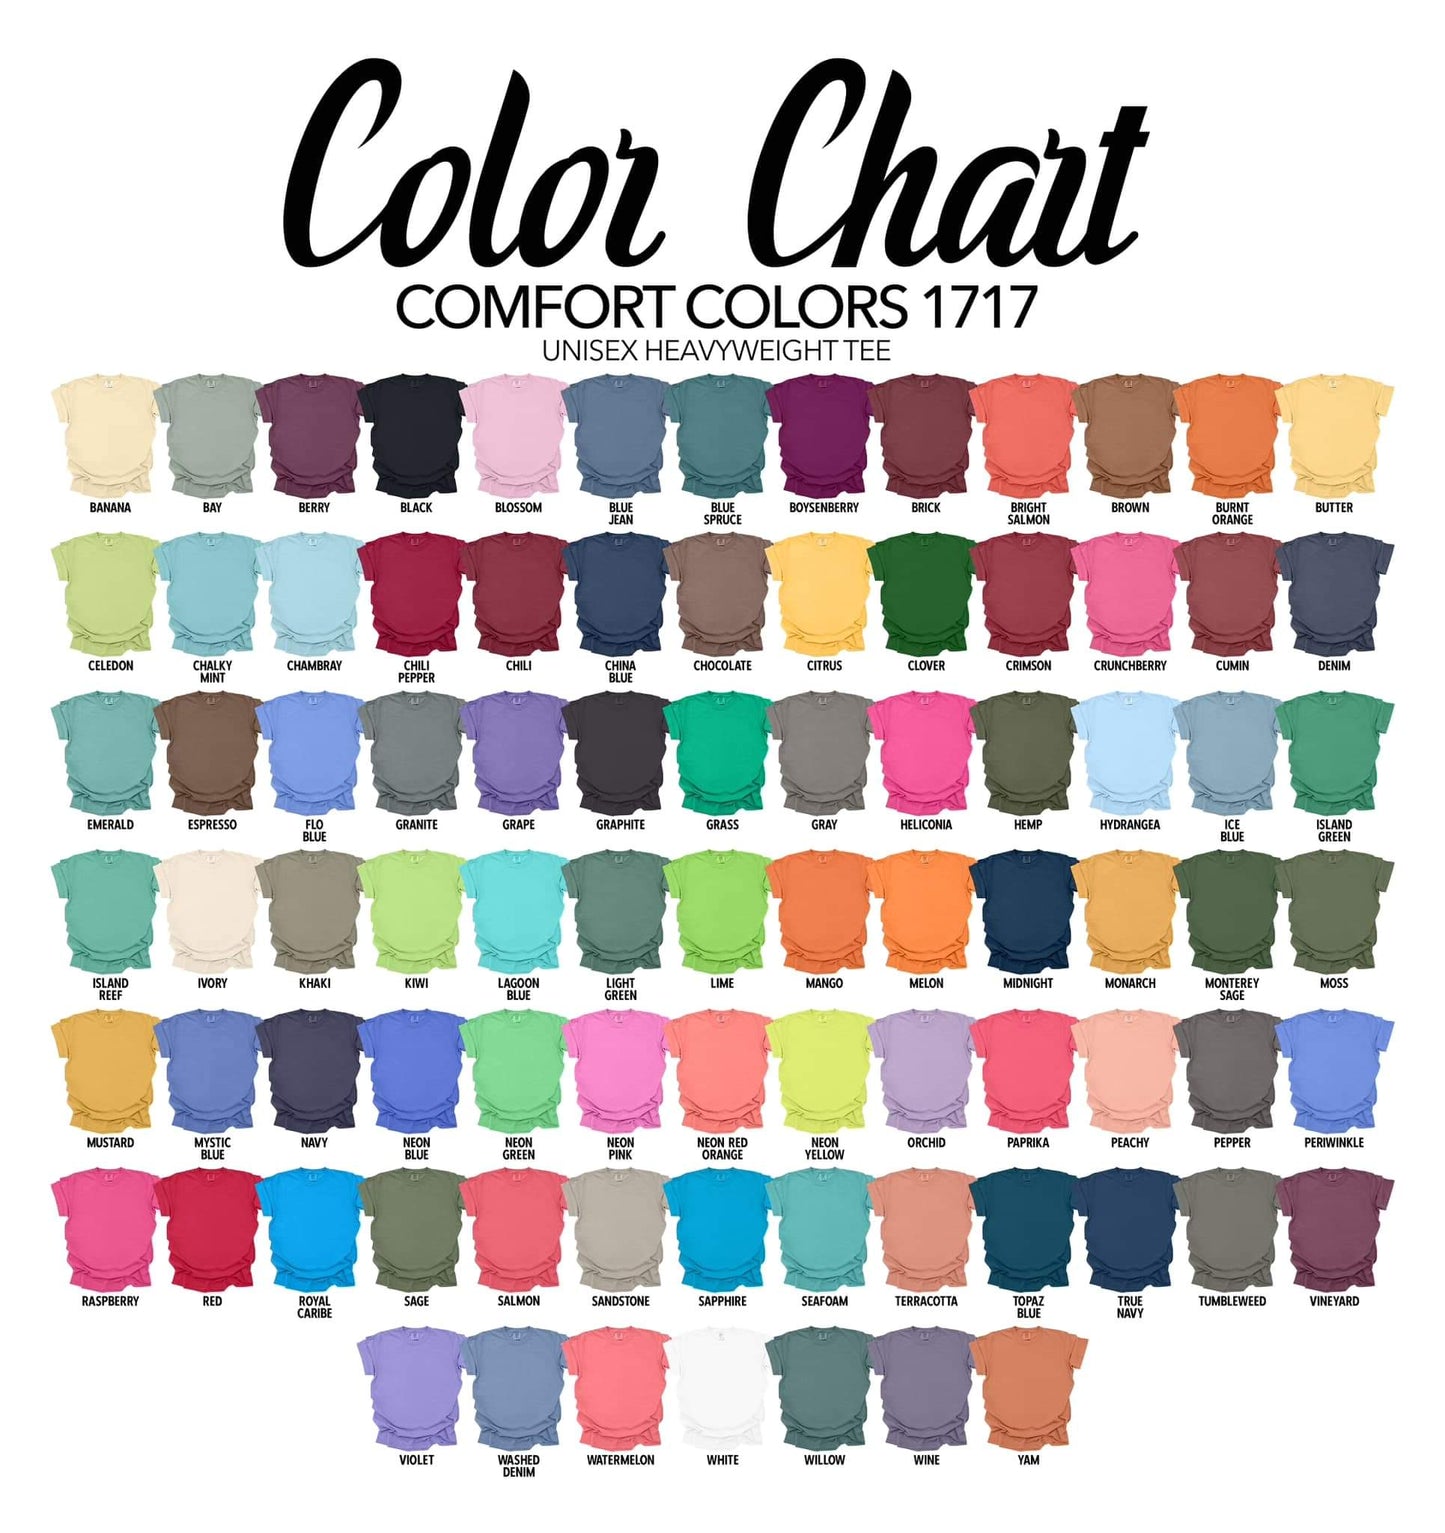 the color chart for a t - shirt